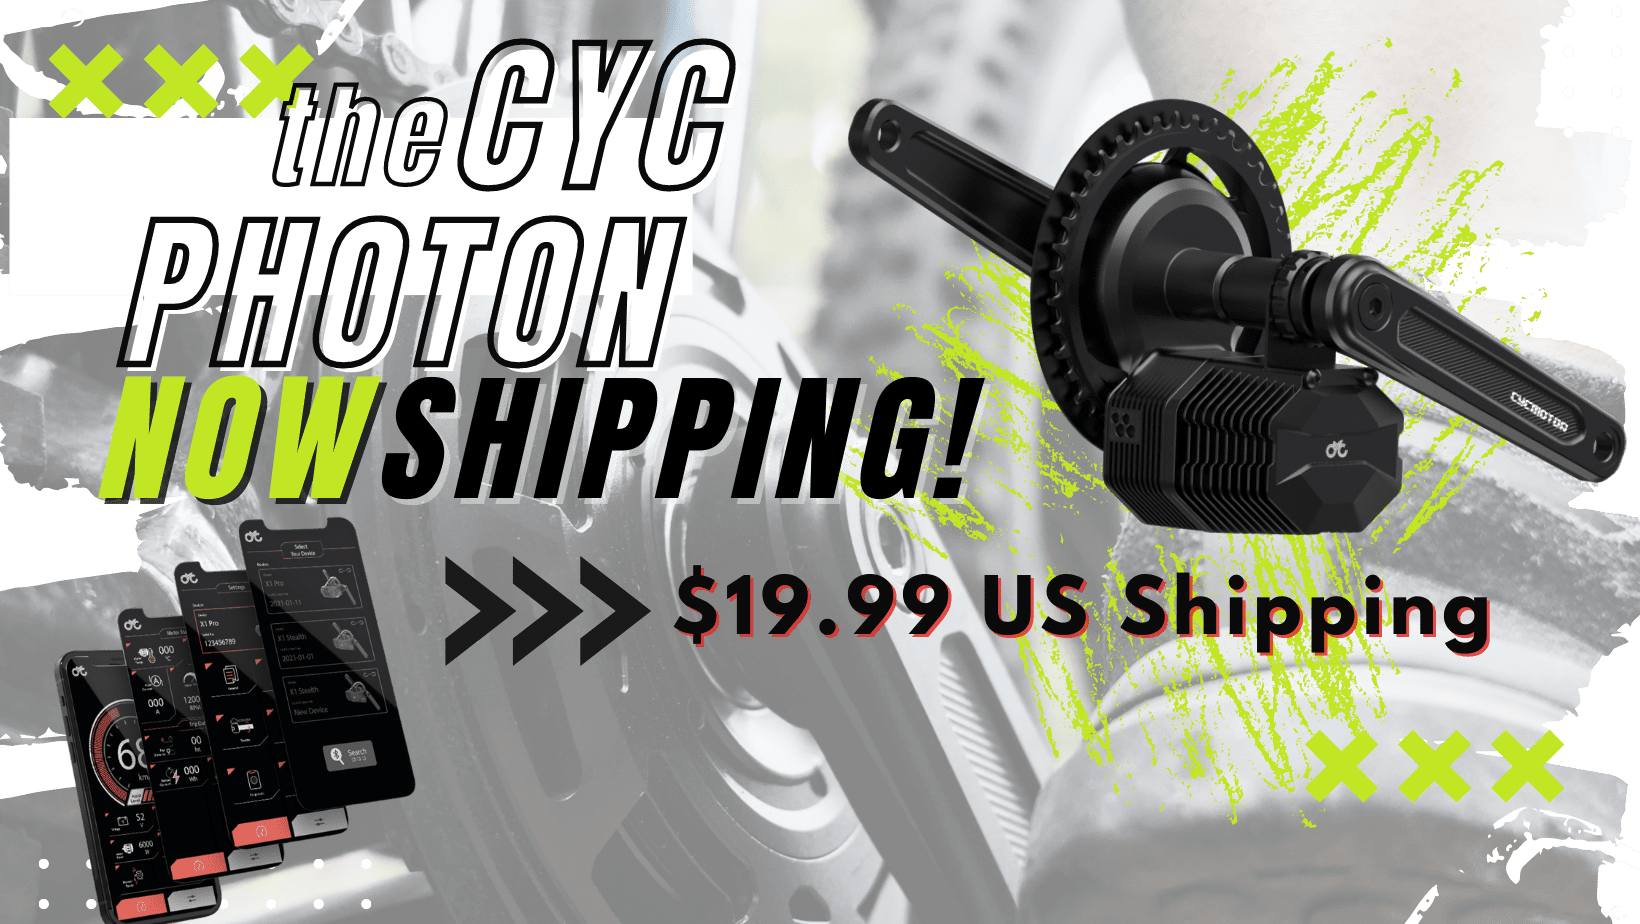 A picture of the cyc shoton shipping information.